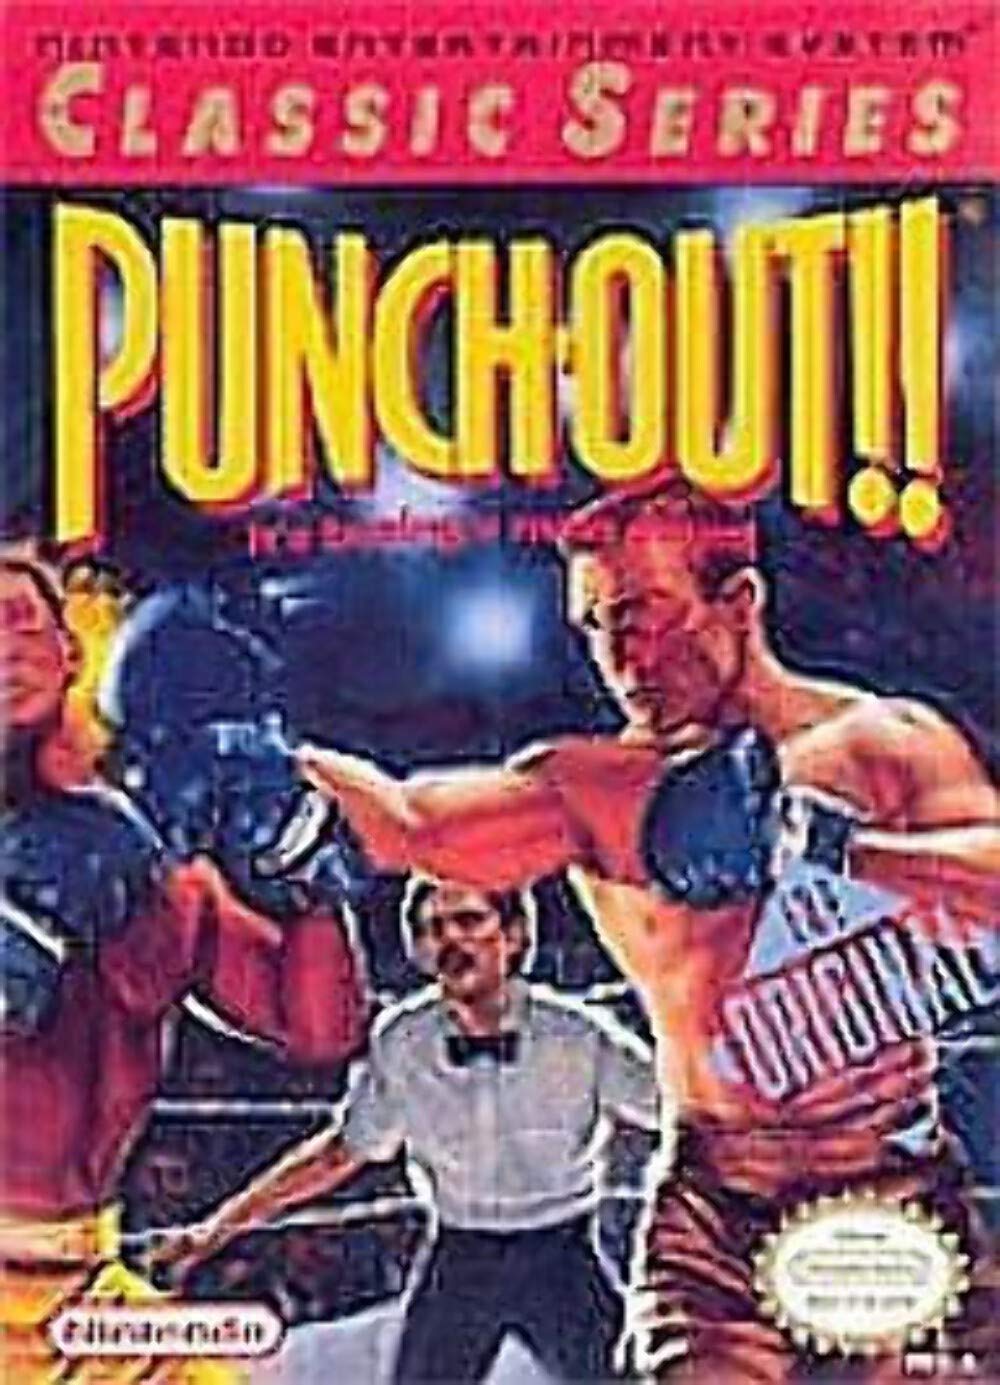 Punch-Out (Classic Series) (Nintendo NES)